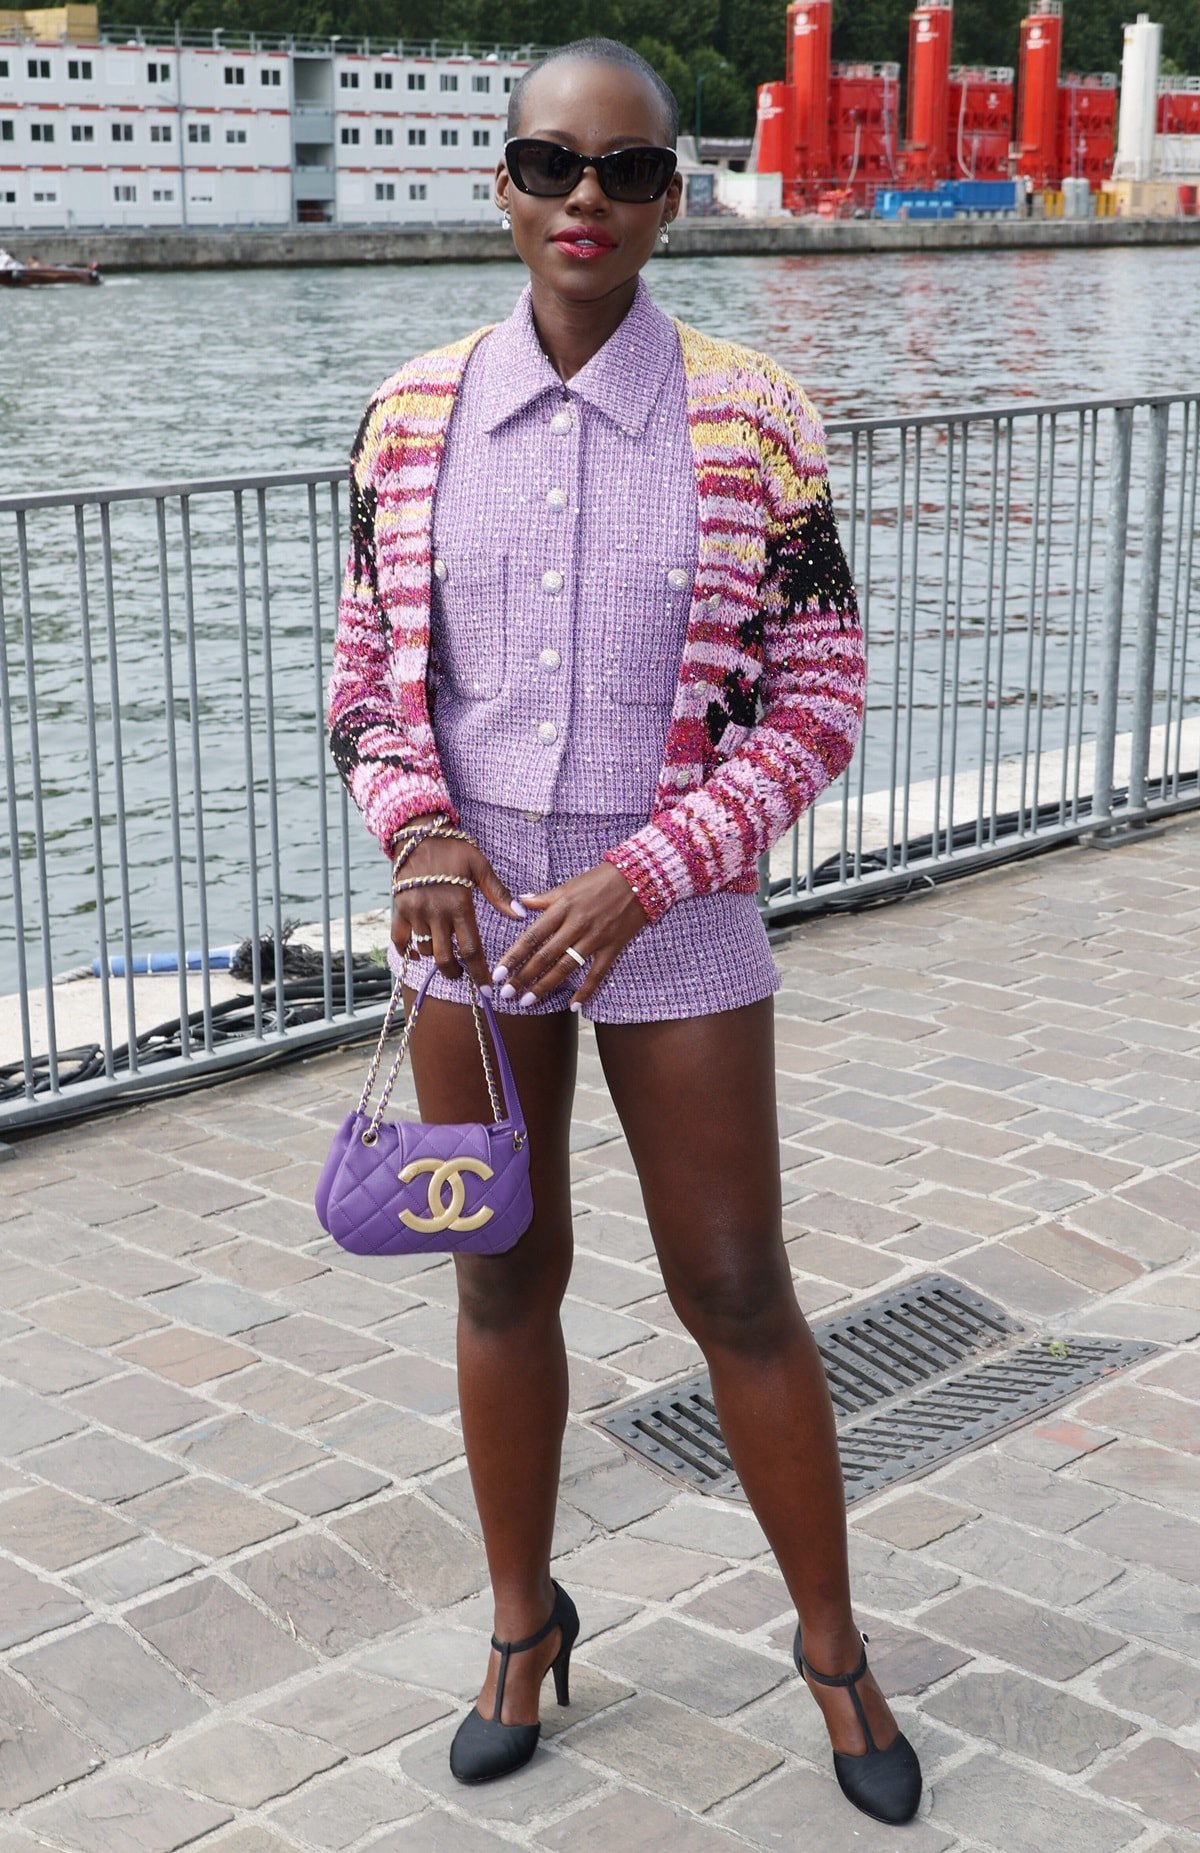 Lupita Nyong'o looked stunning and chic in an elegant lavender tweed ensemble from Chanel, which consisted of a matching vest and shorts set, at the Chanel Haute Couture Fall/Winter 2023/2024 show